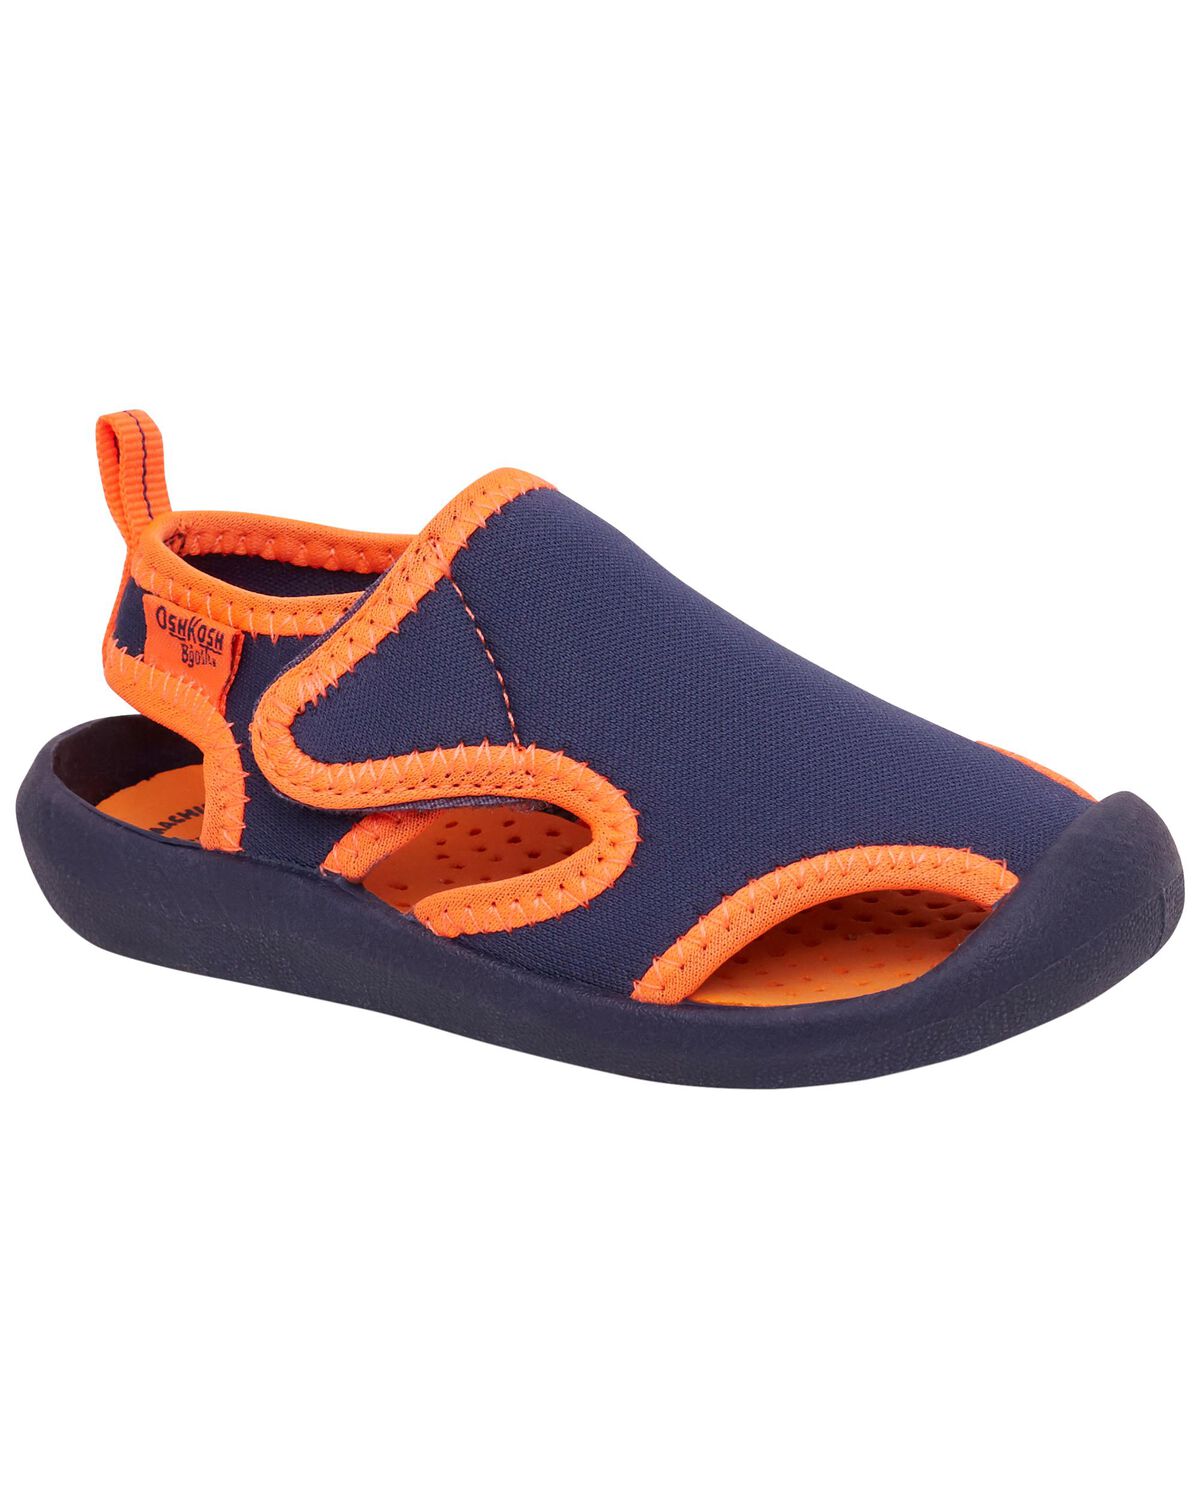 Navy Toddler Water Shoes | carters.com